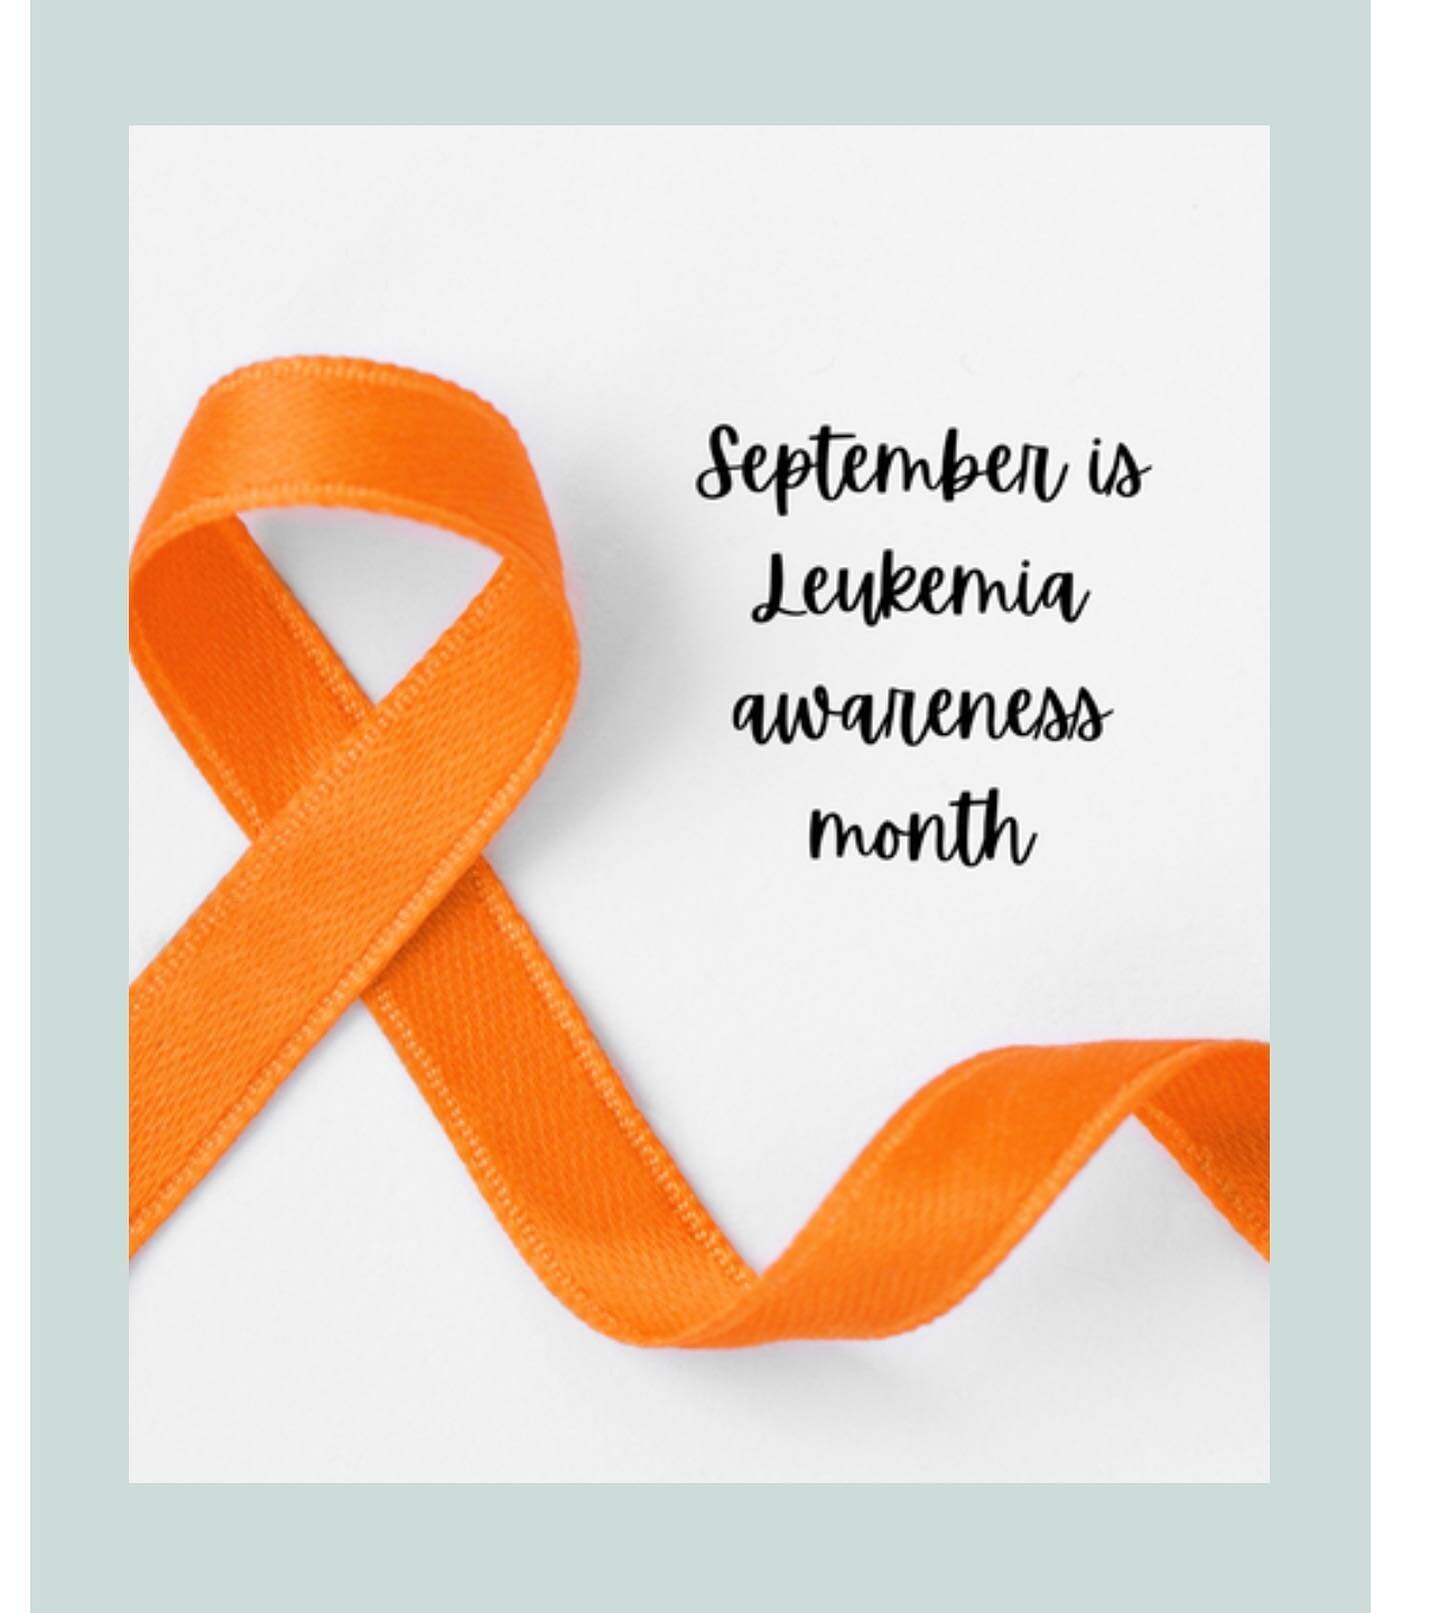 🧡 September is Leukemia Awareness Month! 🧡

At Restoration Direct Primary Care, we believe in the power of awareness and support for those fighting leukemia. Leukemia affects countless individuals and families, and together, we can make a differenc